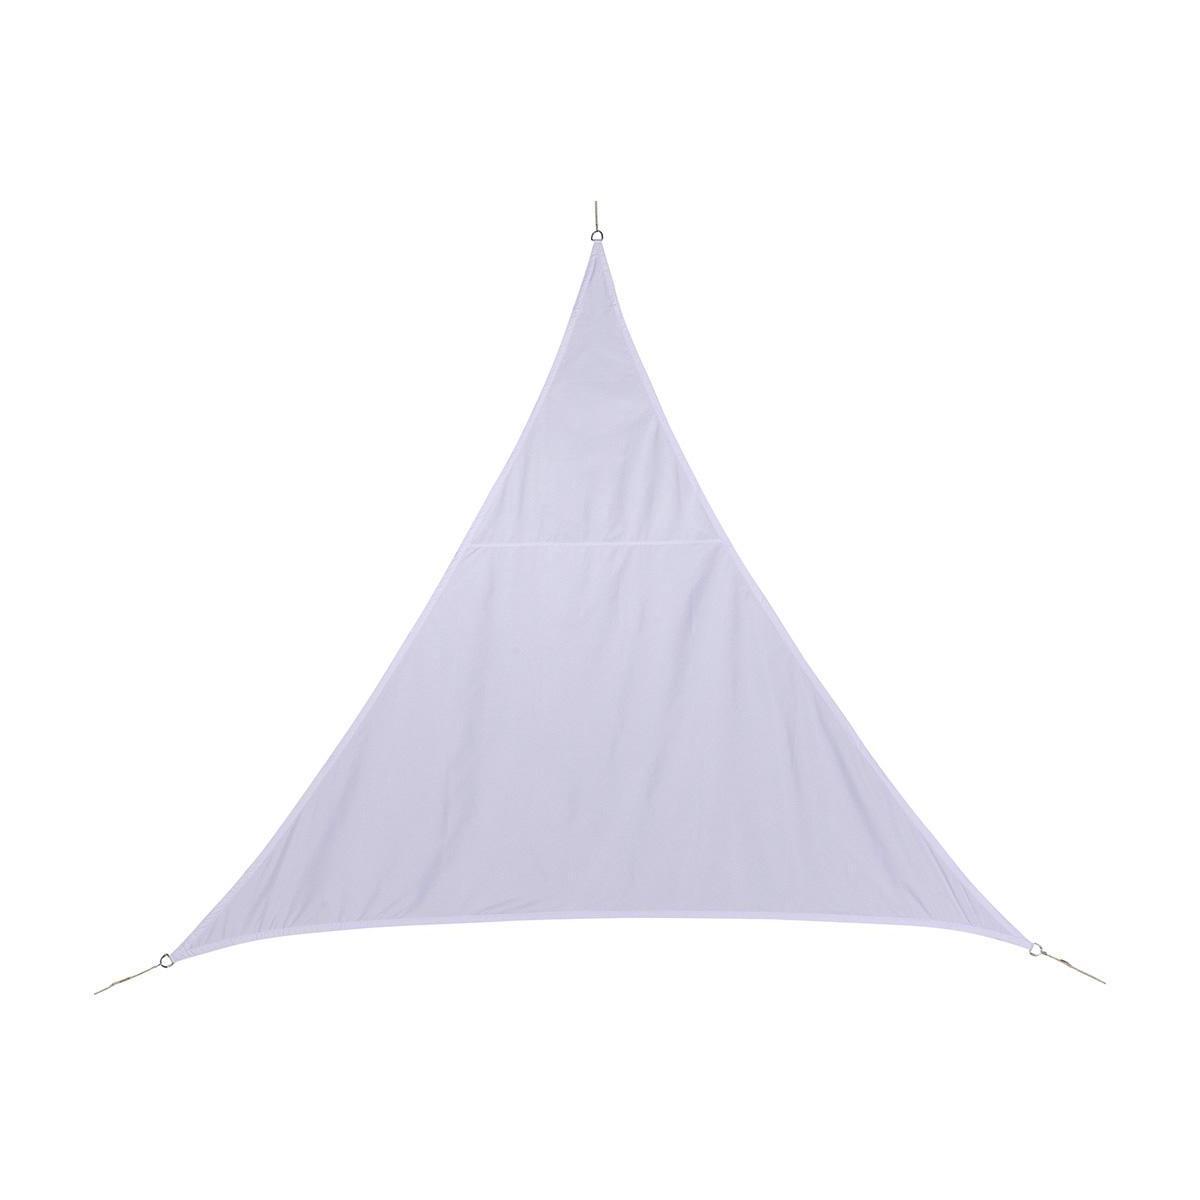 Voile d'ombrage triangulaire - Polyester et Polyamide - 3 x 3 x 3 m - Blanc